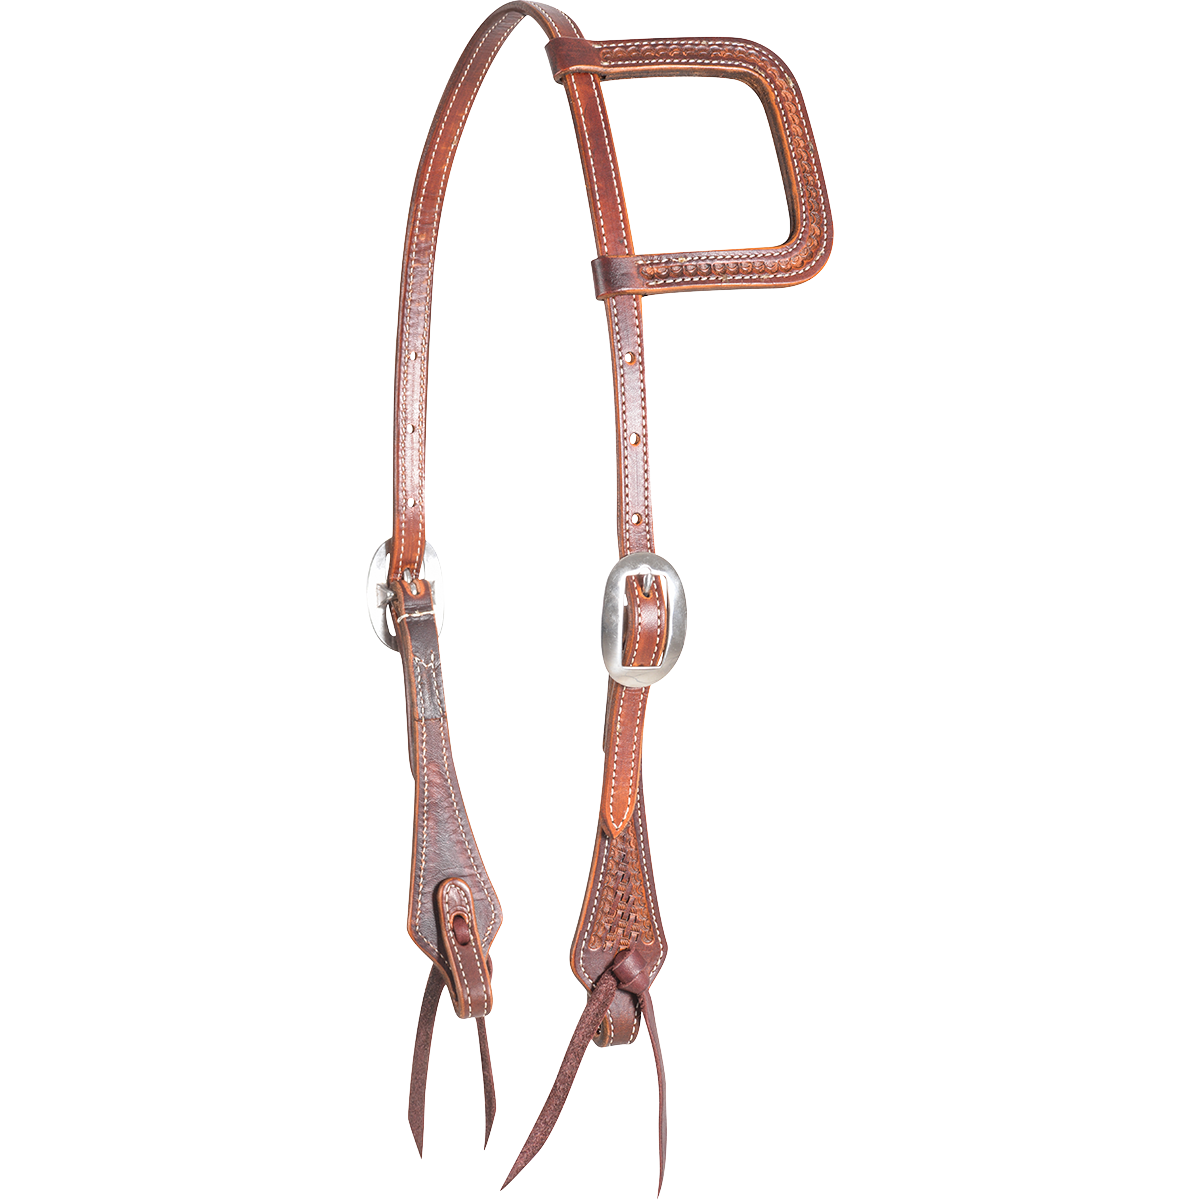 Antiqued and Tooled Slip Ear Headstall